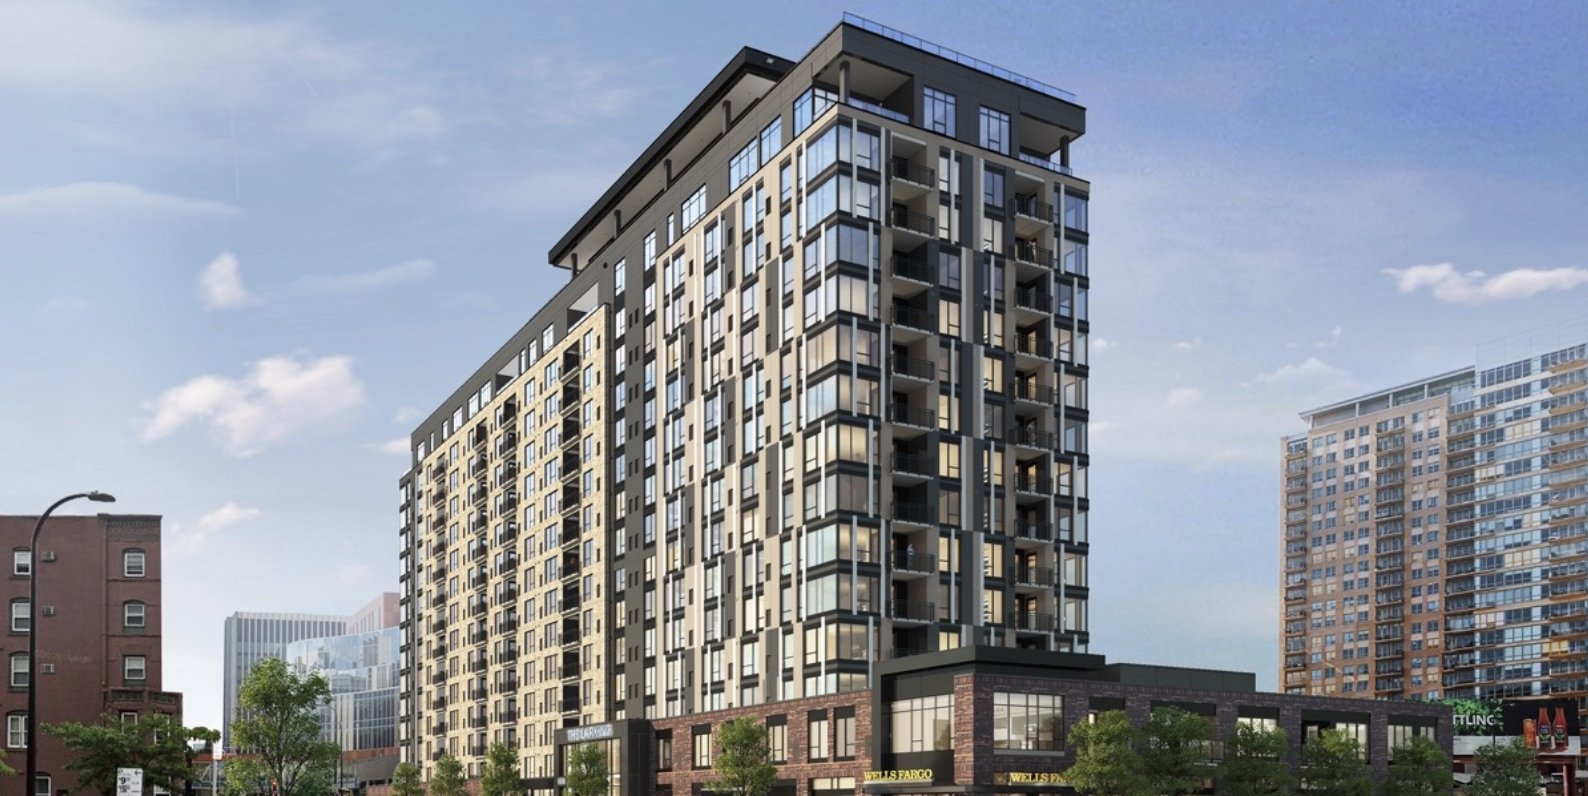 The Larking is a mixed-use development in the Twin Cities market. Images: Courtesy of Kraus-Anderson